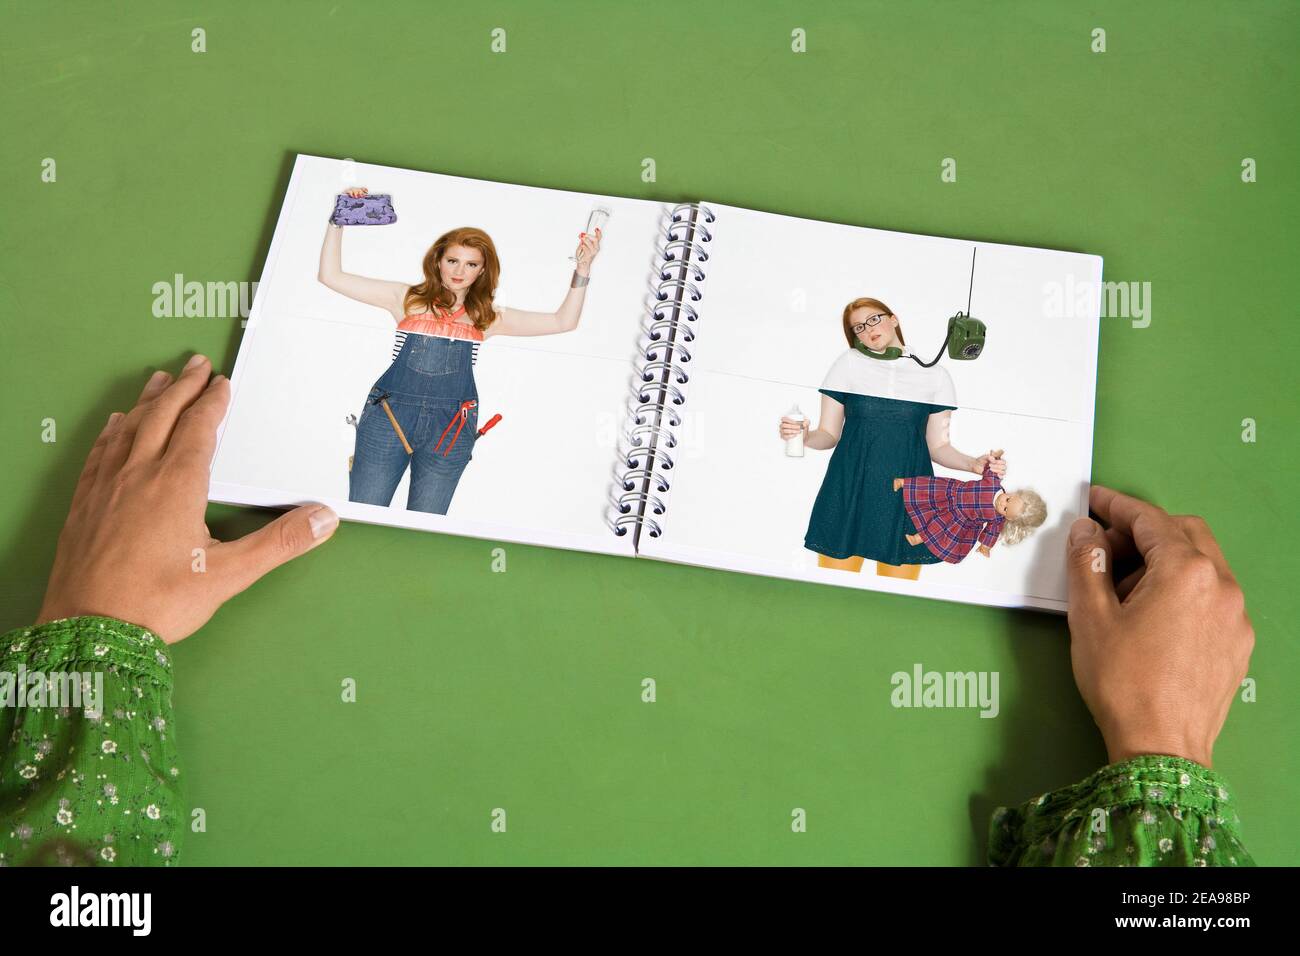 Woman's hands hold an open book in which Klip Klap photos of women in various roles can be seen, green table and green blouse, bleed, without a face Stock Photo